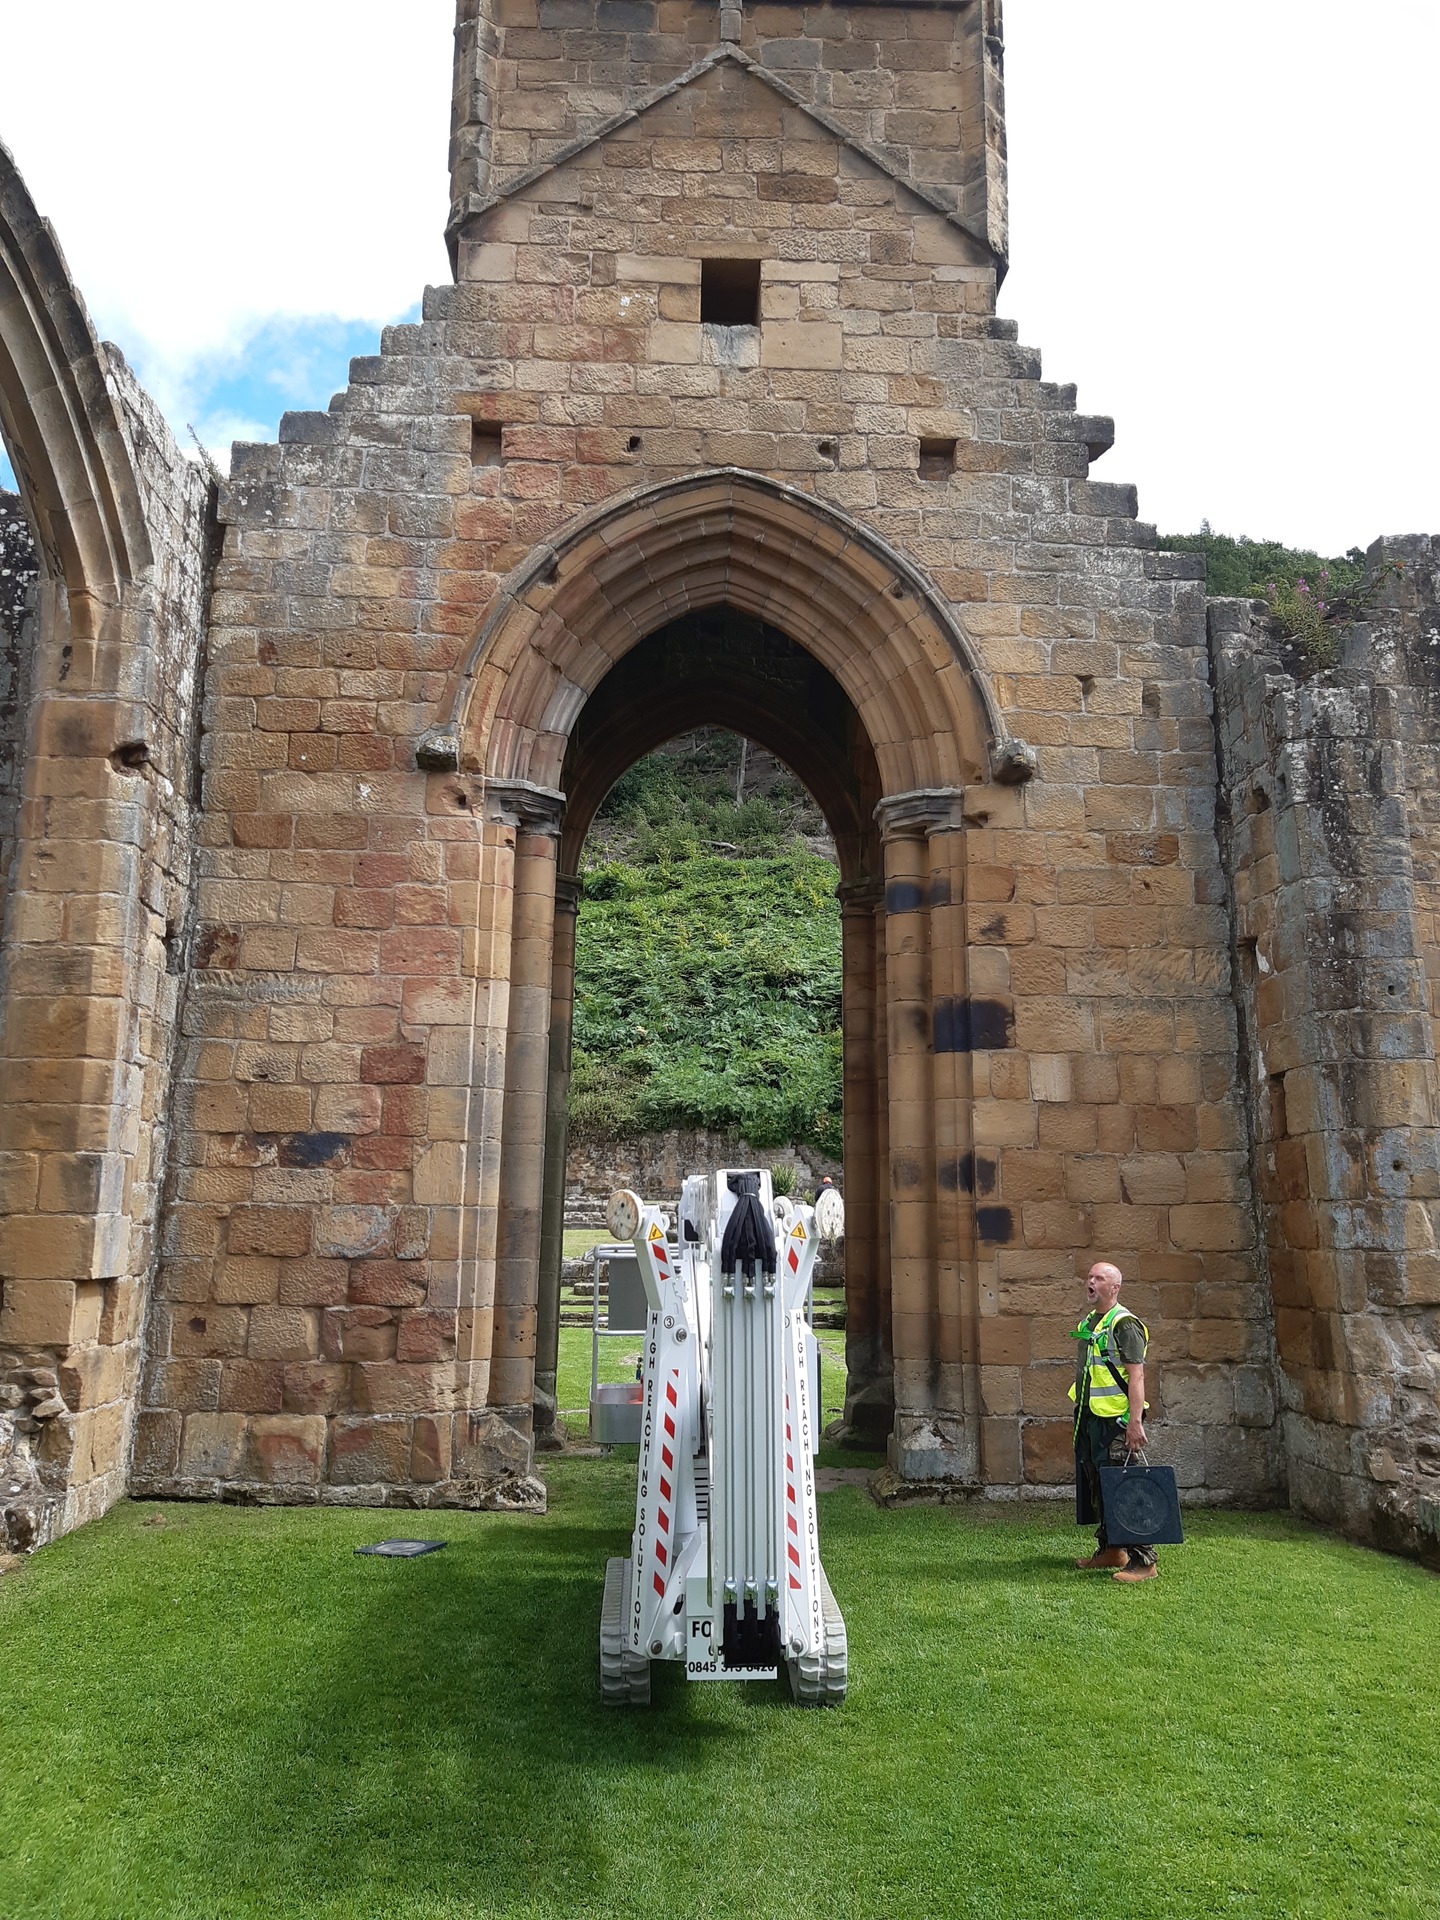 Lottie, High Reaching Solutions 20m Lithium hybrid tracked spiderlift cherrypicker assisting with a Stone Survey after going through an archway at a ruined abbey near Northallerton, North Yorkshire.